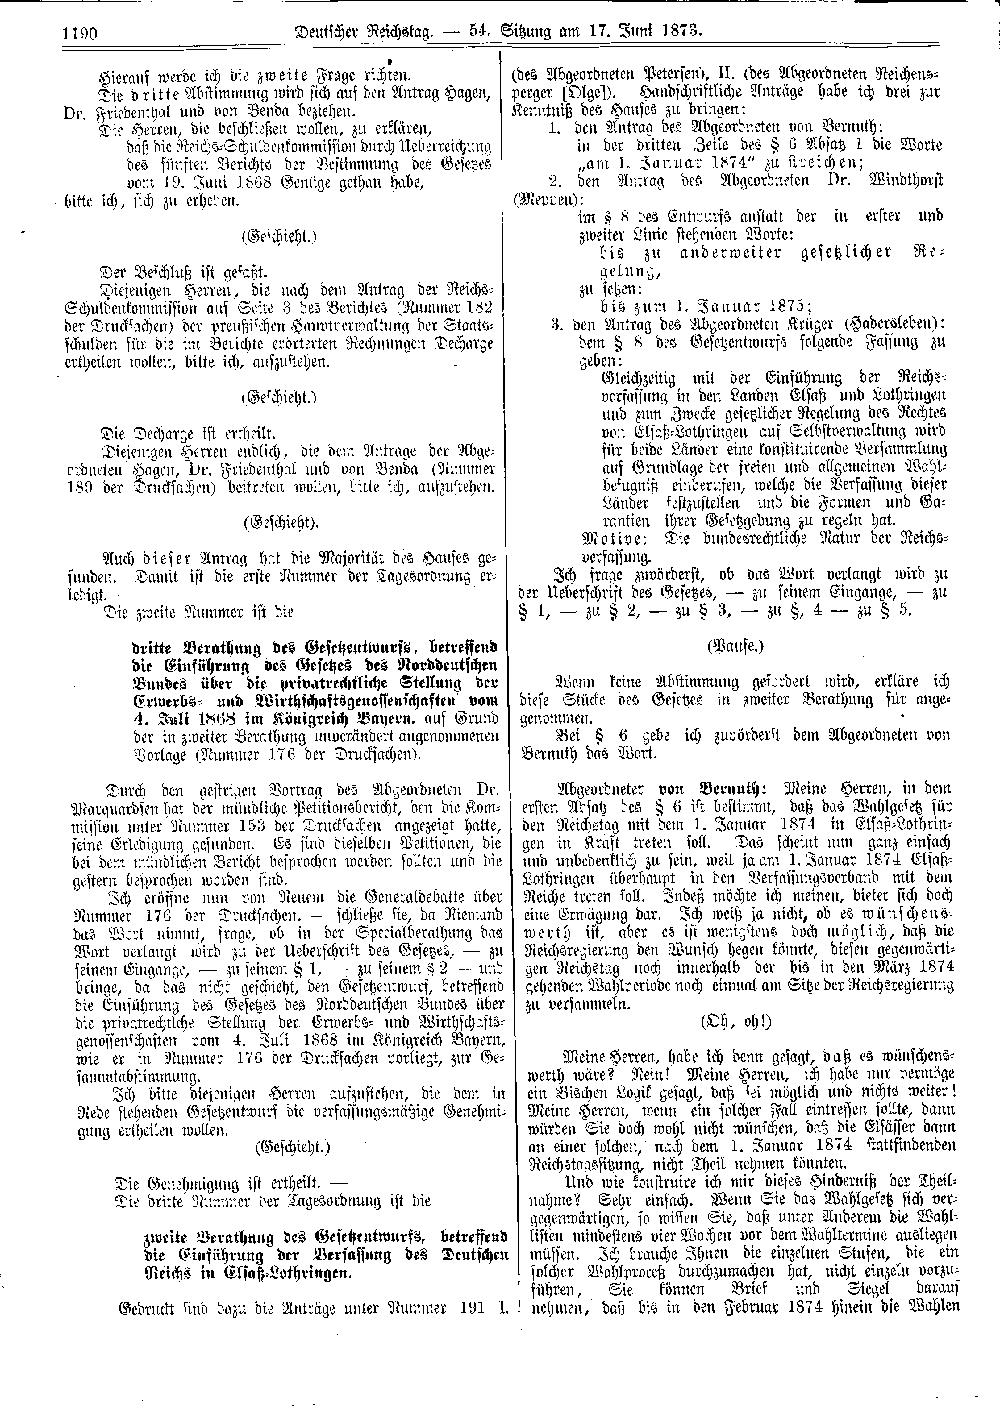 Scan of page 1190